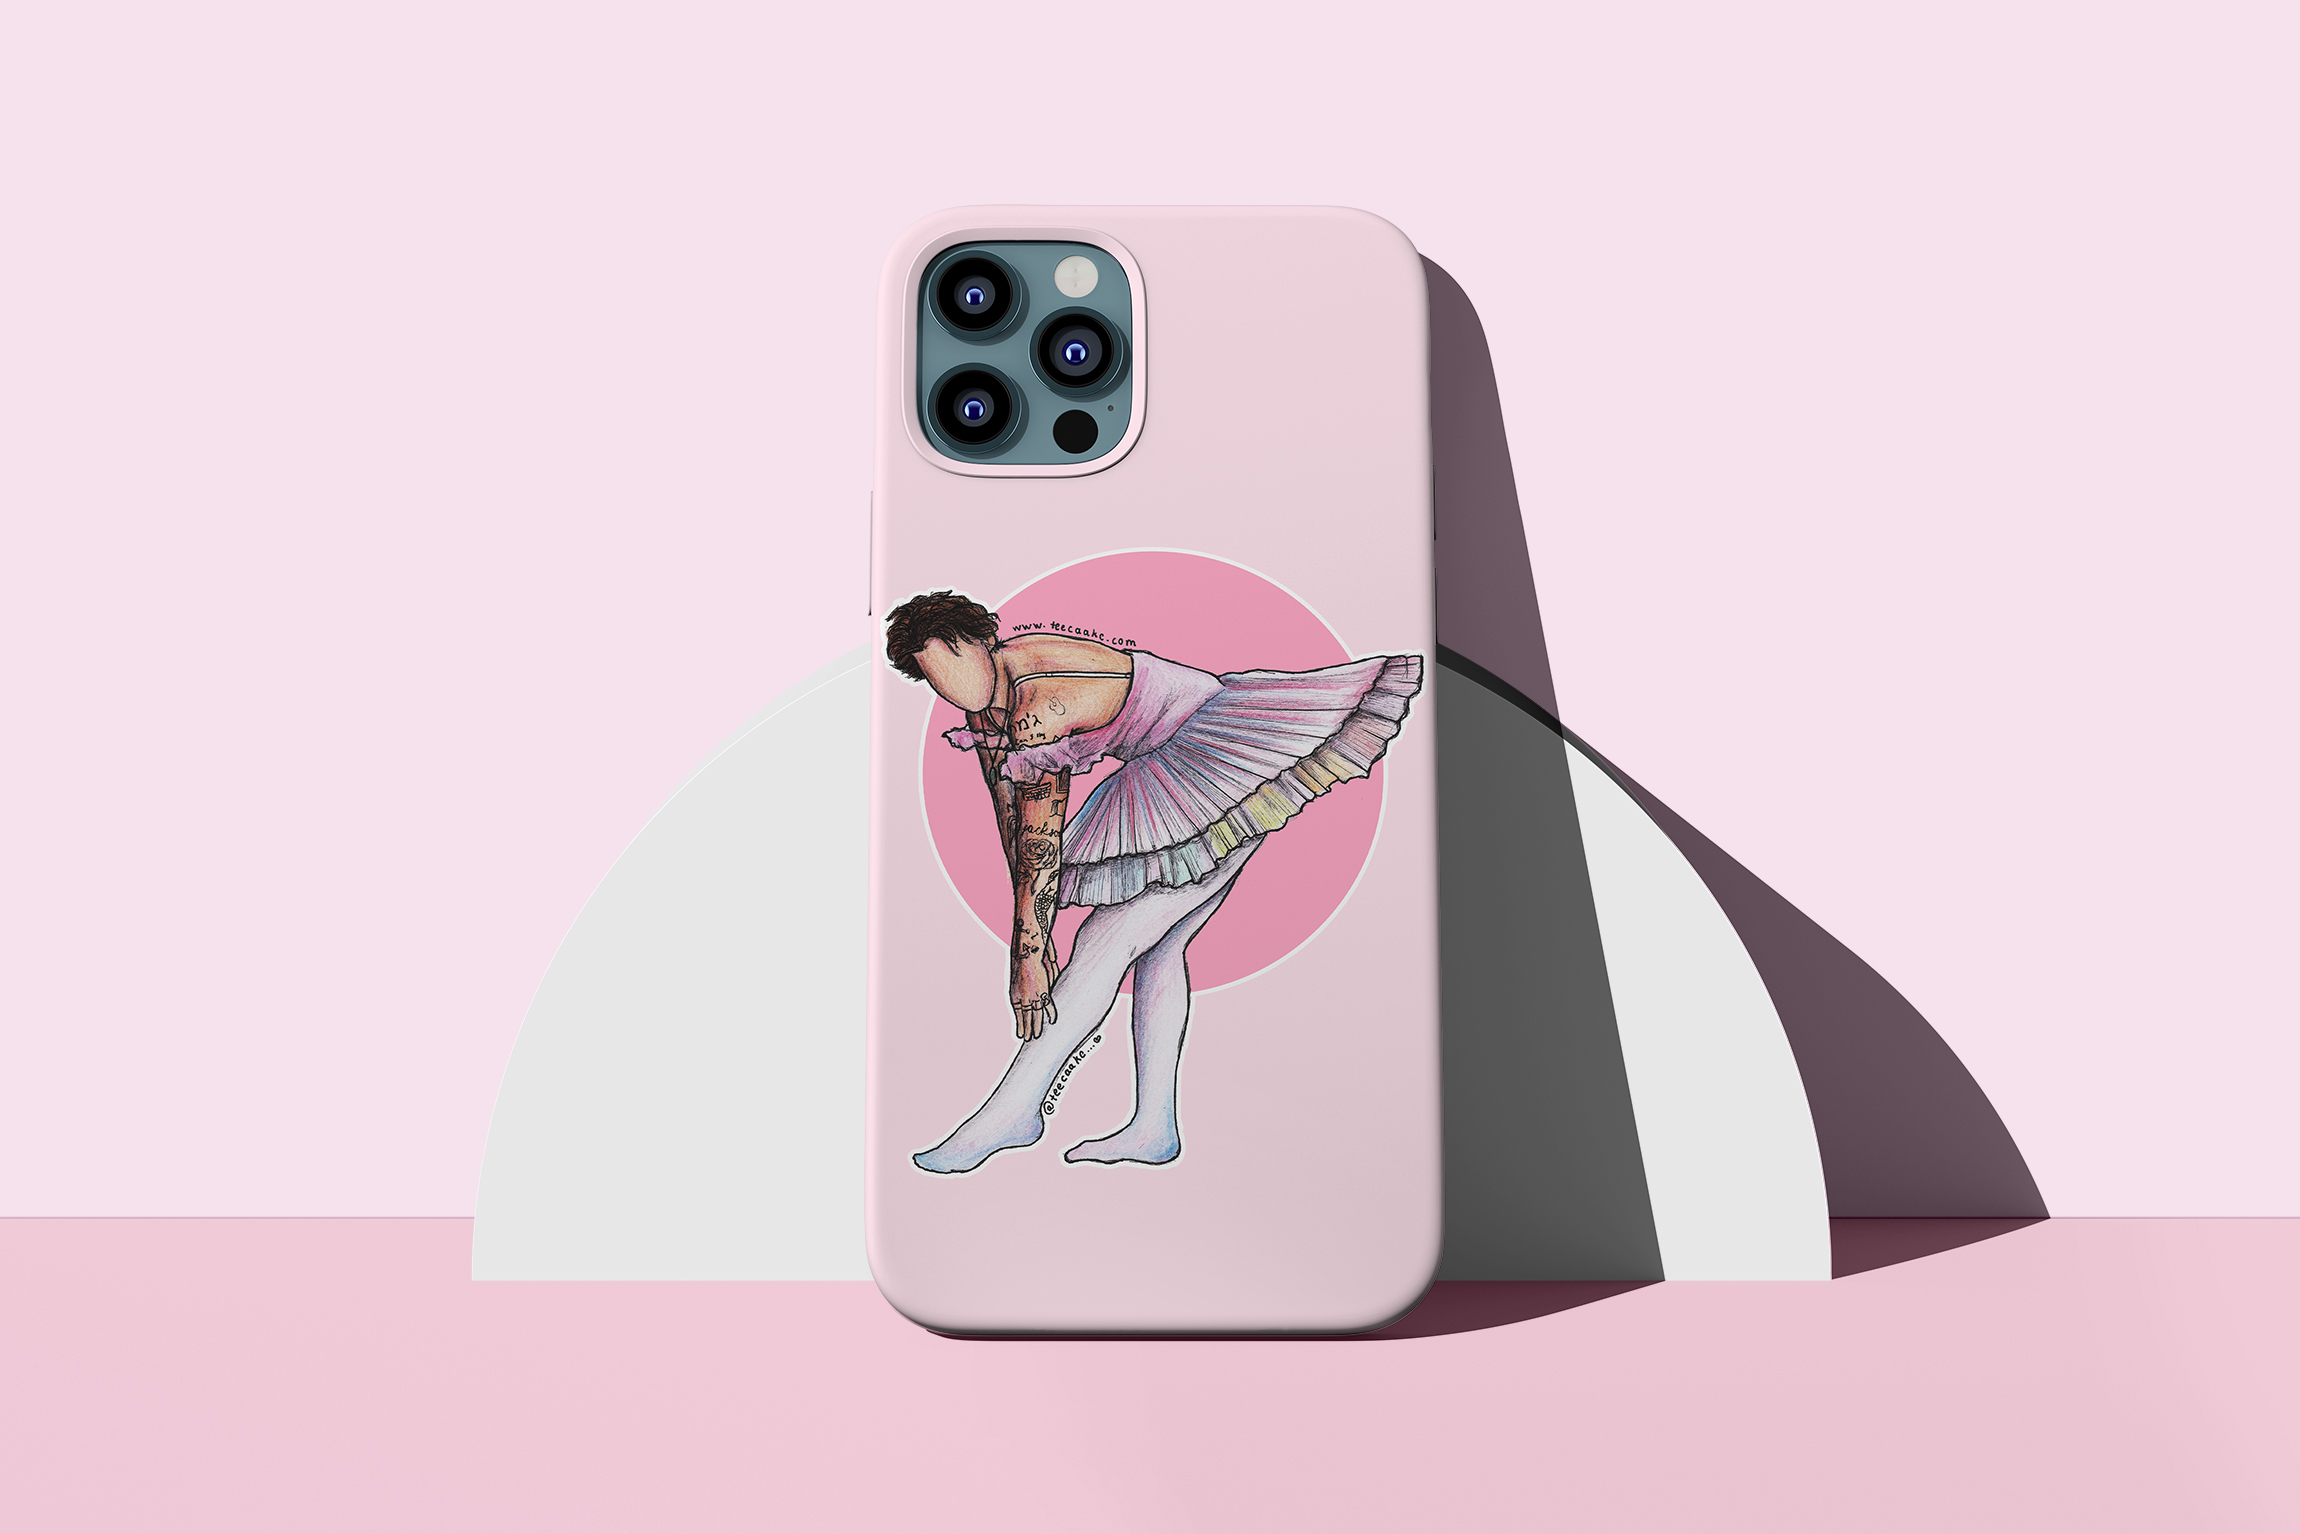 Samsung S10+ Aesthetic Dancer Phone Case Ballet Art Cover fit for iPhone 13,12,11 Pro Xs 8,X Z173 A12 A70 Huawei P30,P20 S20 A51